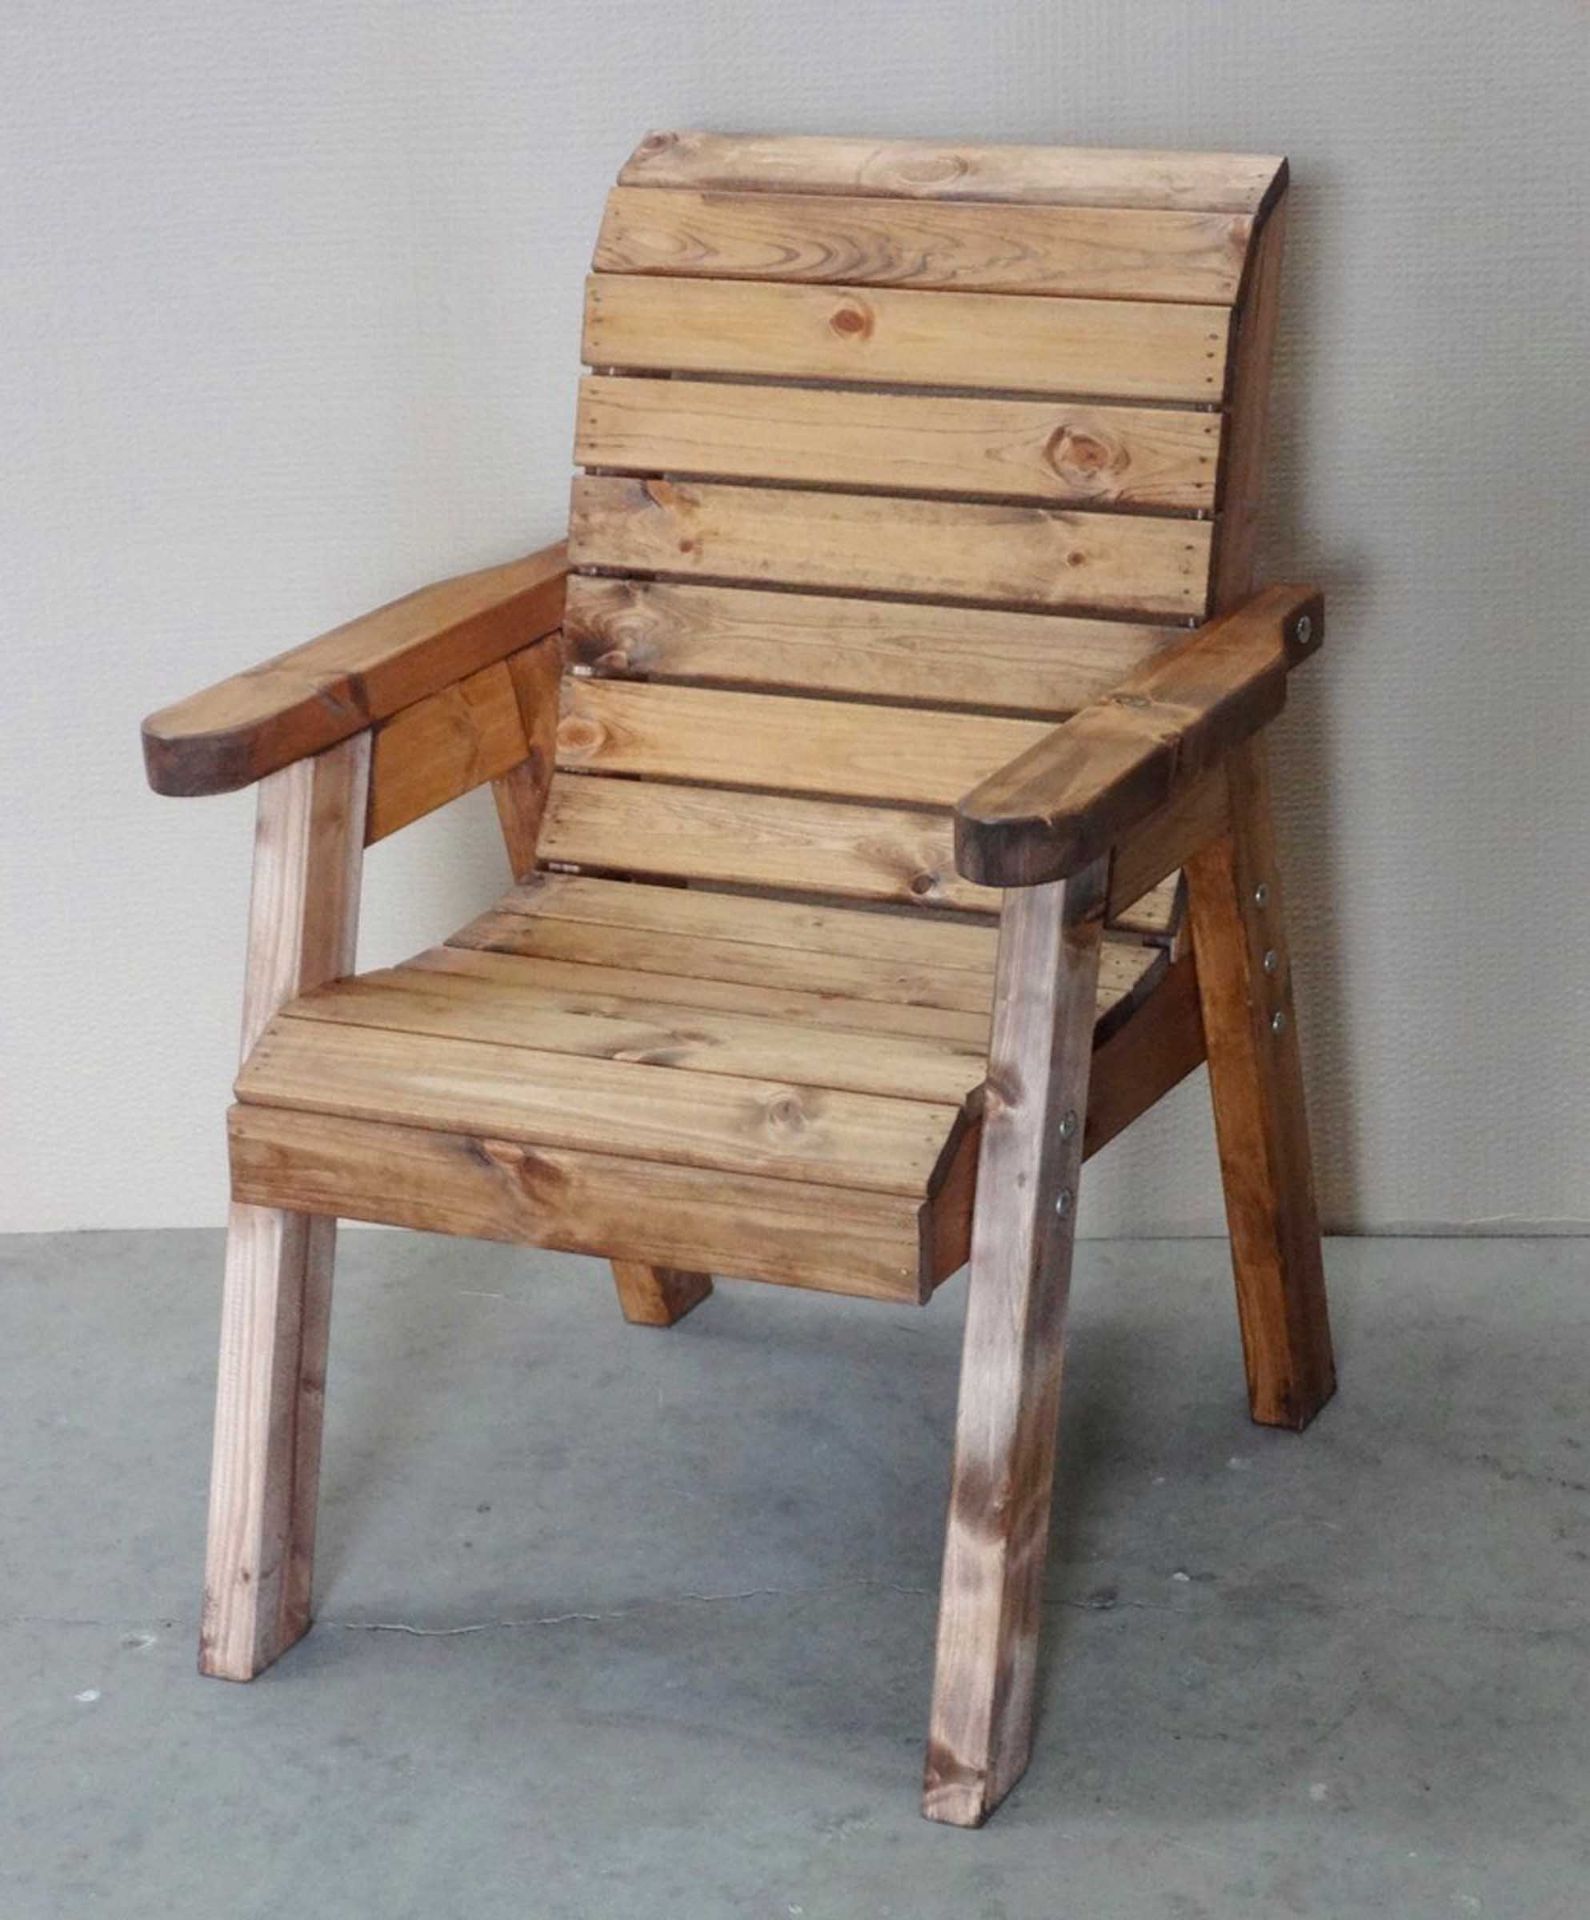 Traditional rustic pine chairs.